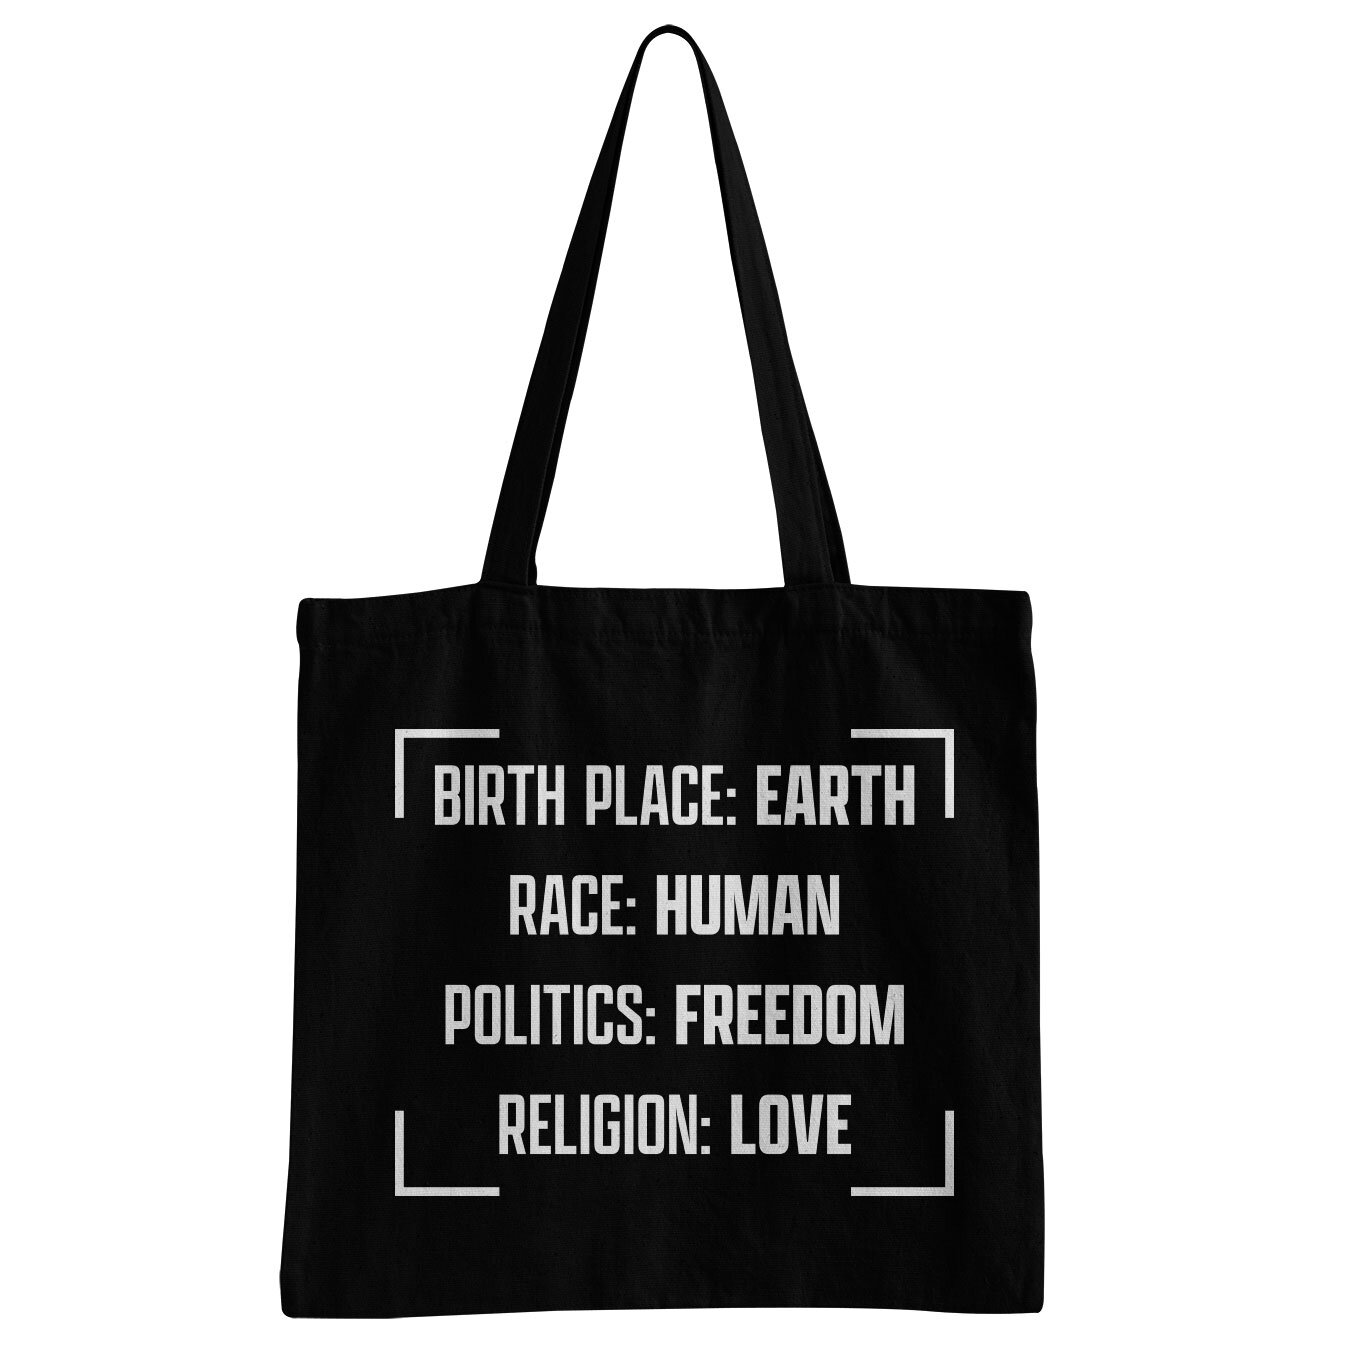 Birthplace - Earth Tote Bag